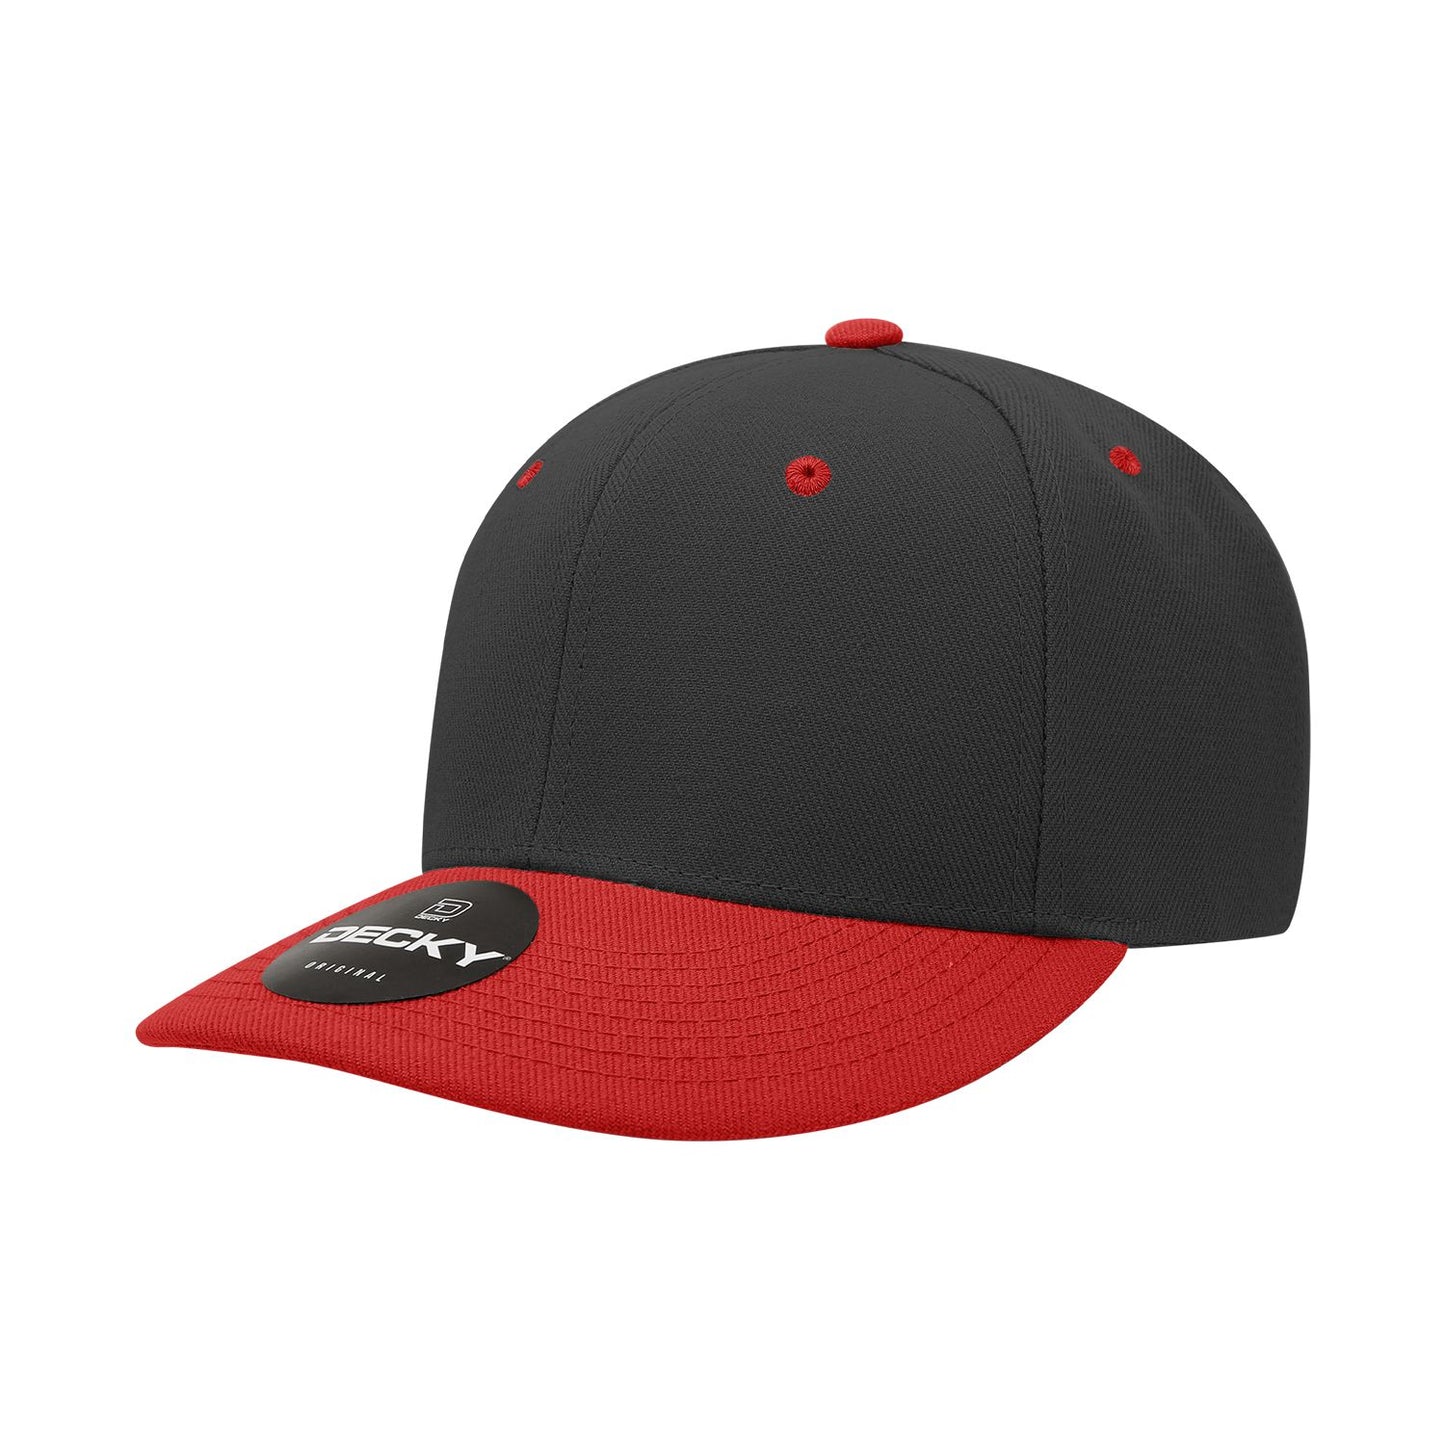 Decky 207 Deluxe Mid Pro Baseball Hat, 6 Panel Structured Cap - Blank